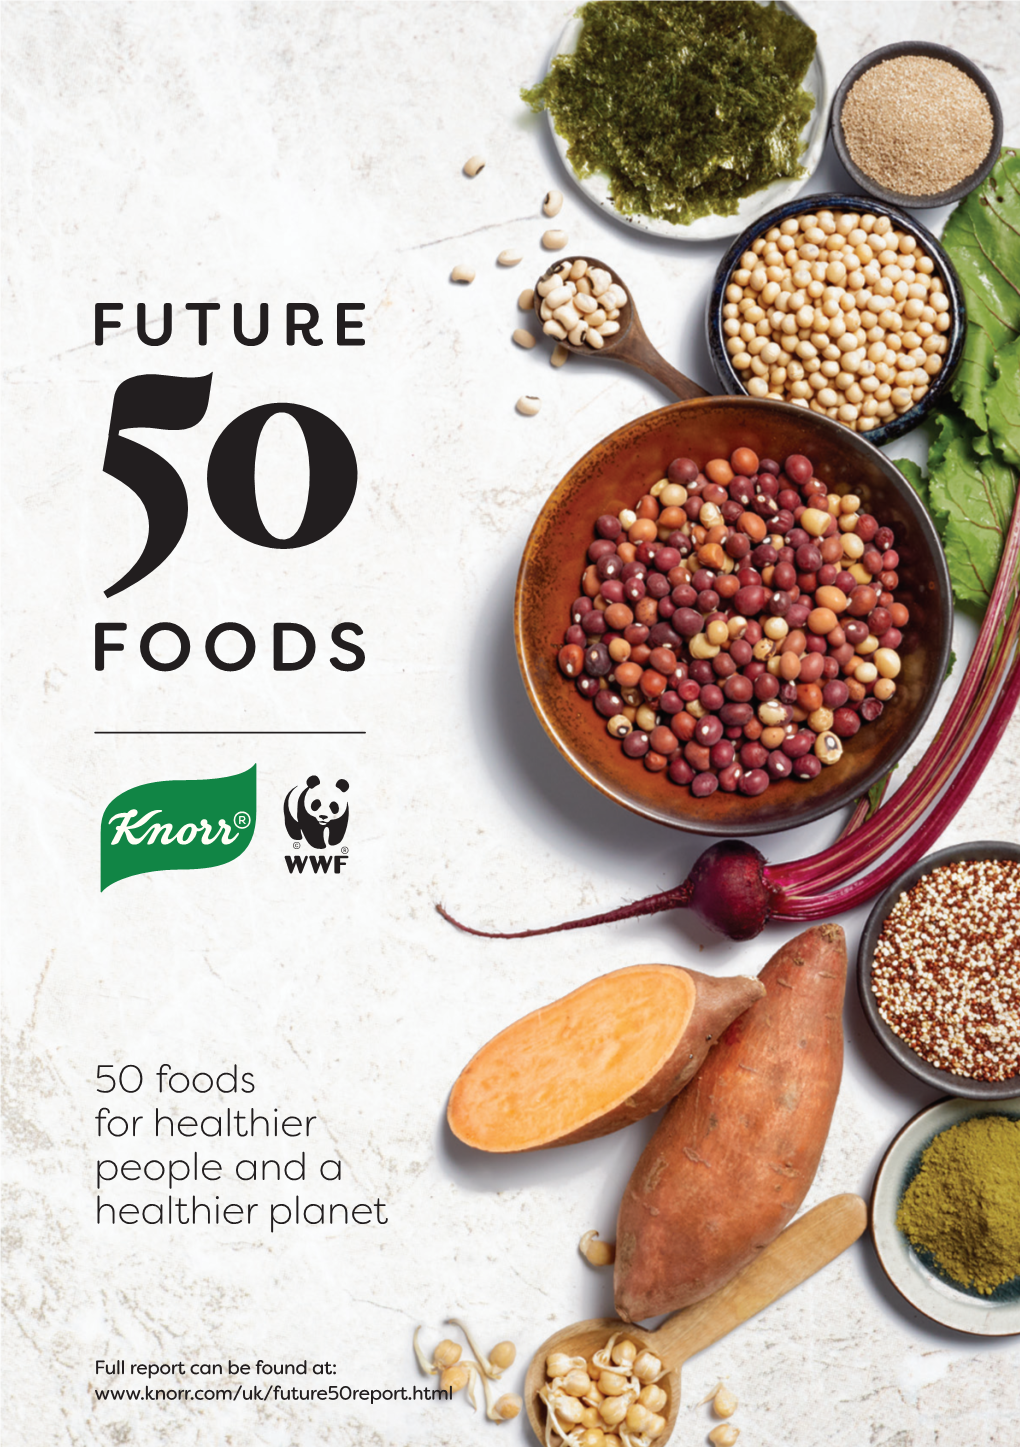 50 Foods for Healthier People and a Healthier Planet